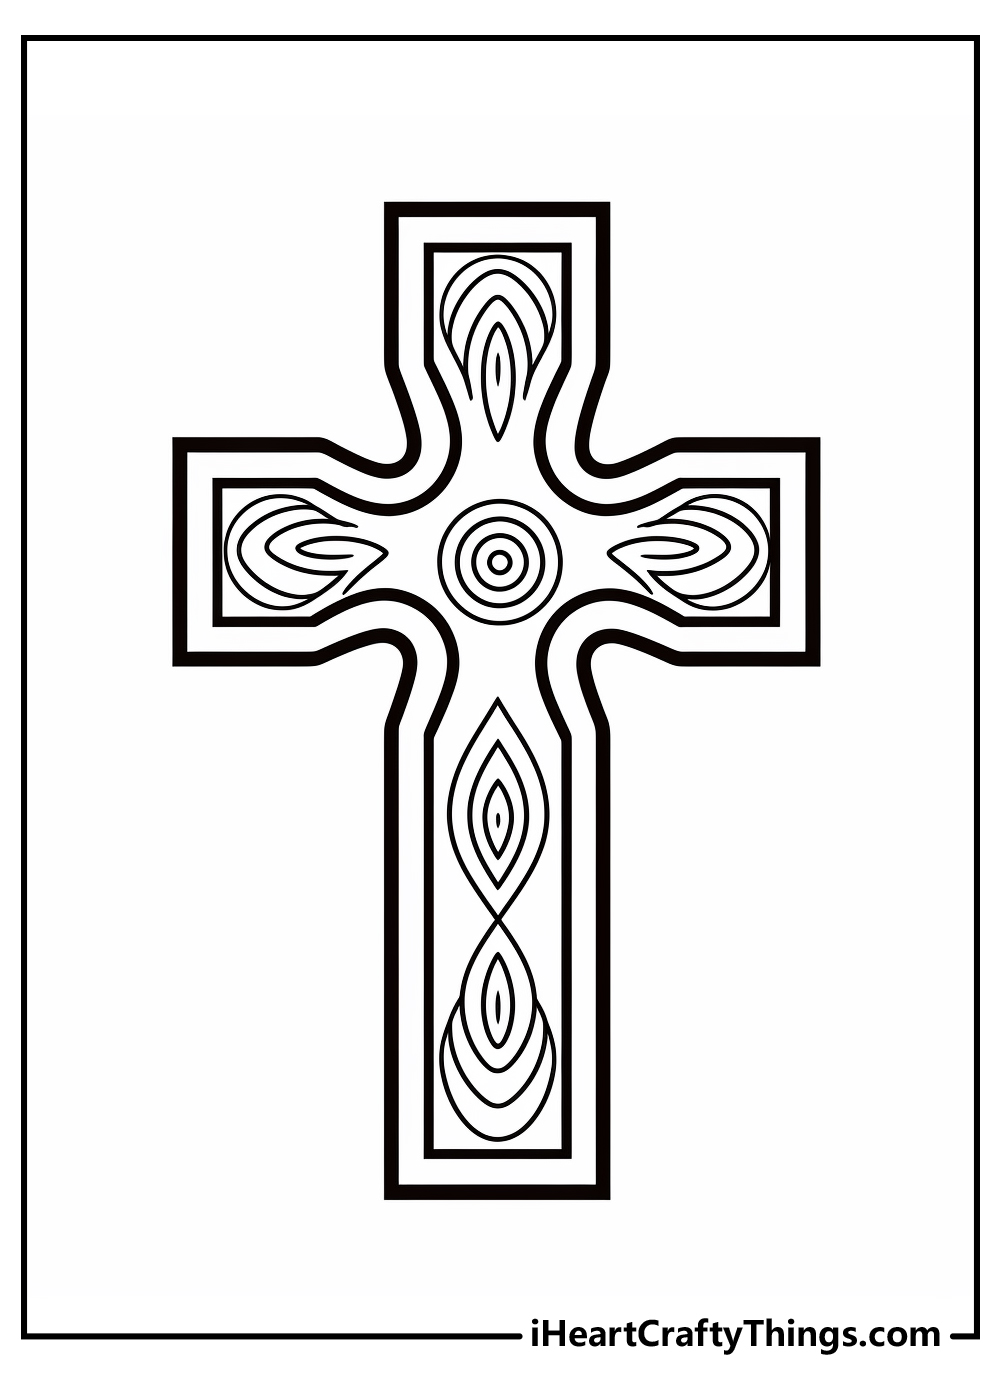 black-and-white cross coloring pages